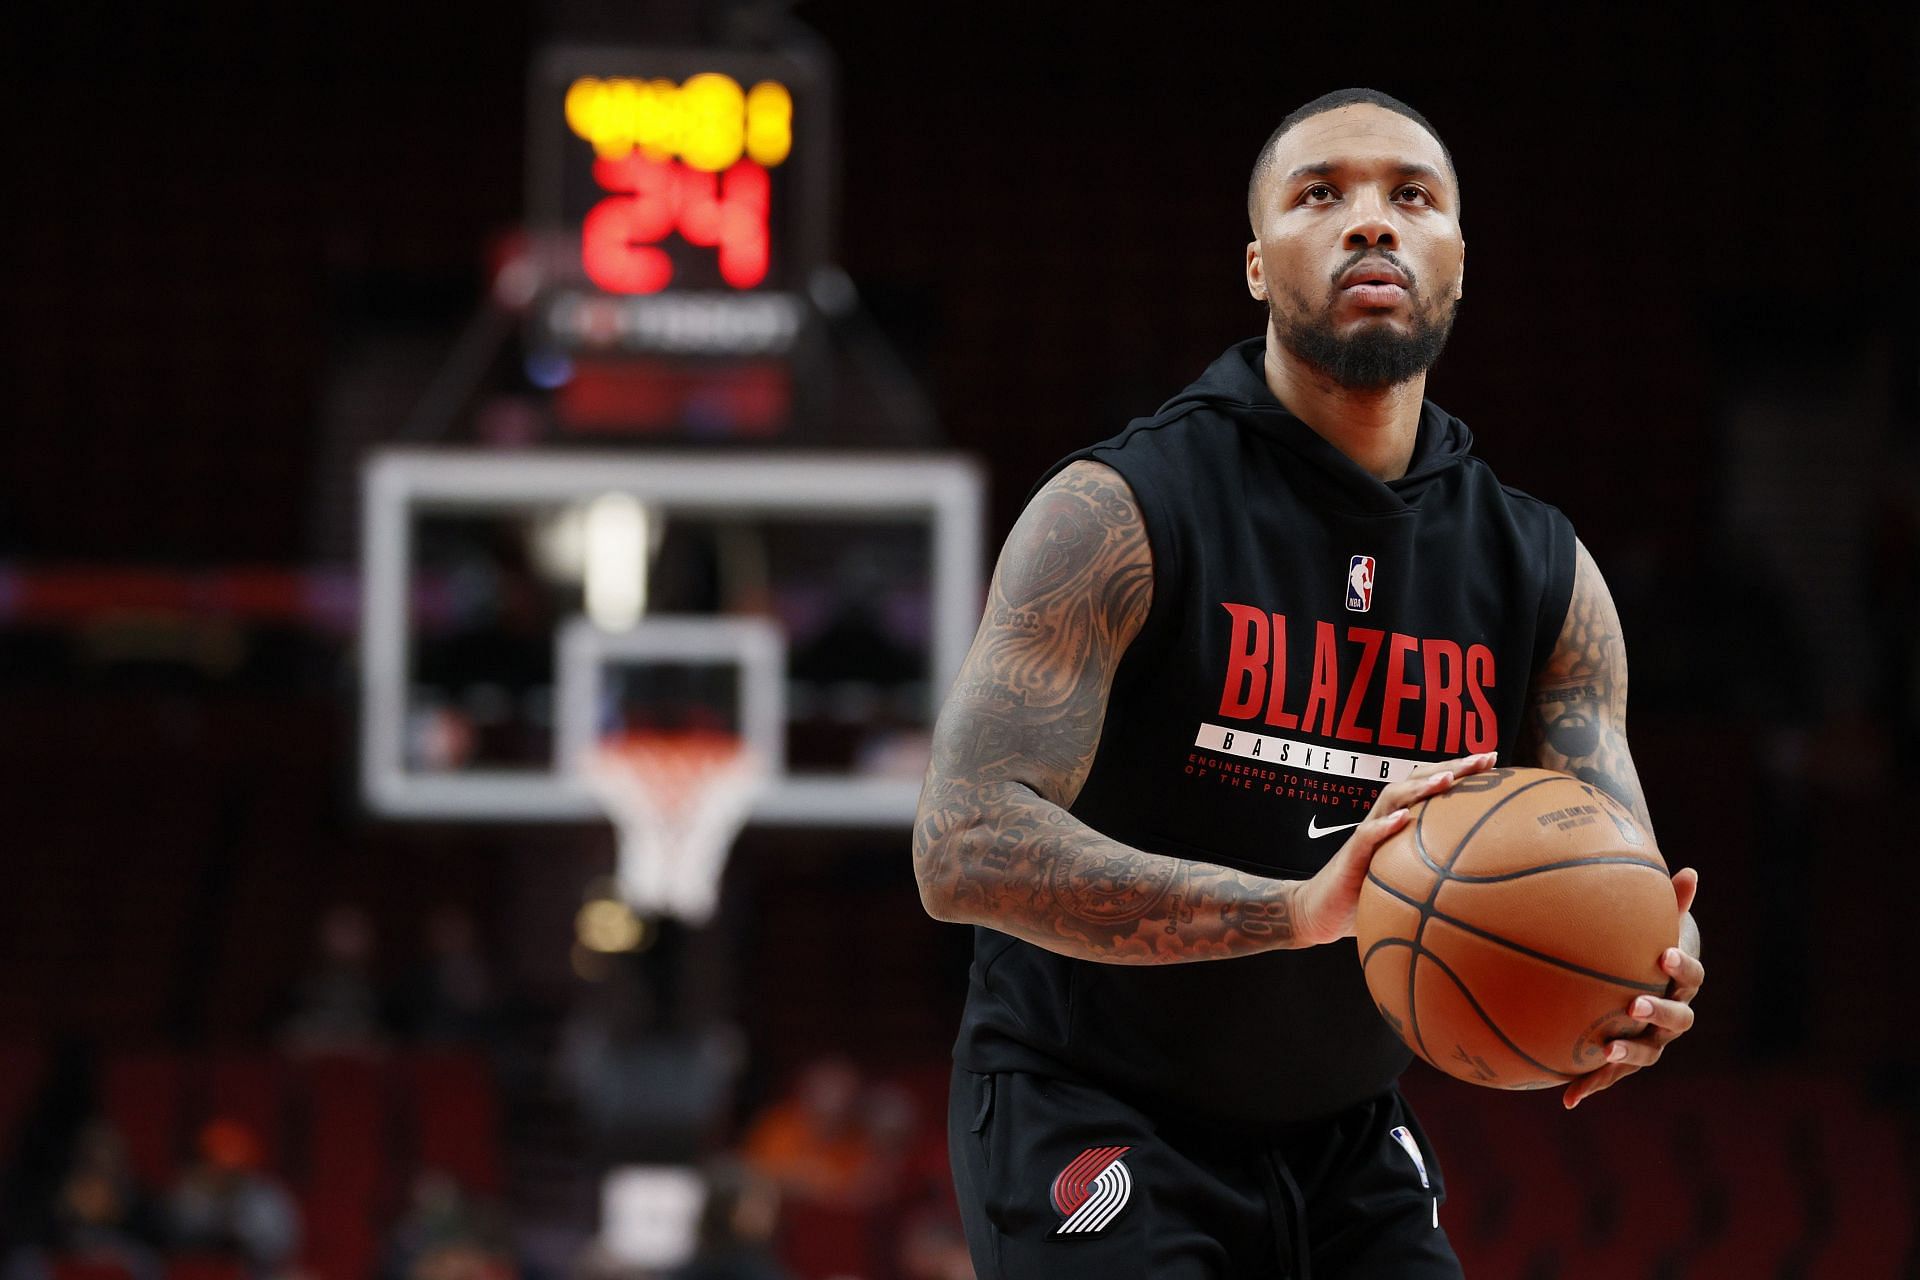 Damian Lillard #0 of the Portland Trail Blazers warms up before the game against the Orlando Magic at Moda Center on February 08, 2022 in Portland, Oregon.